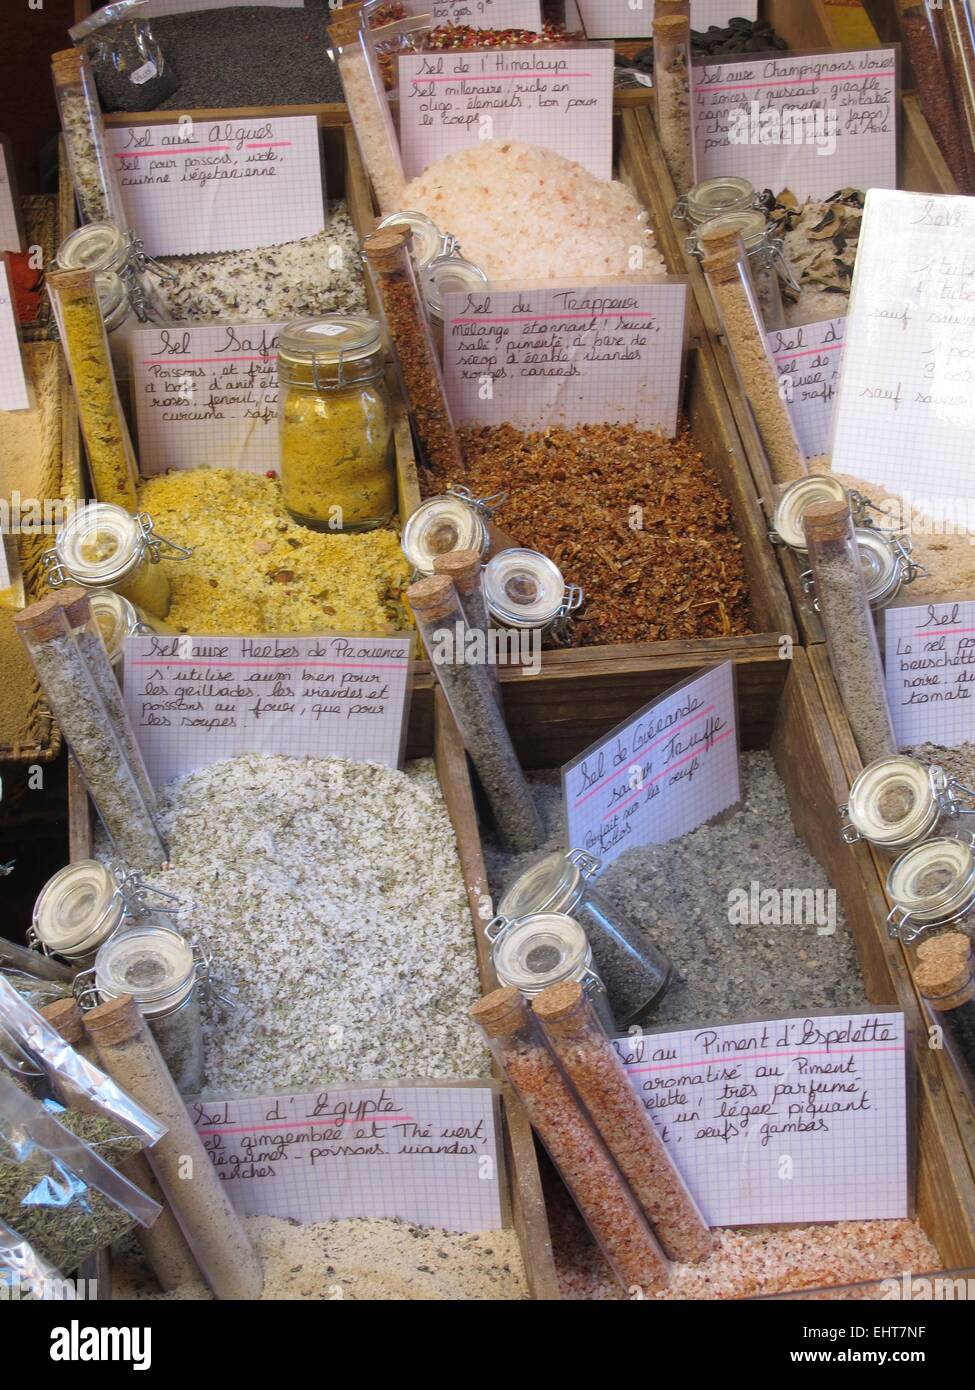 Herbs for sale at a French market Stock Photo